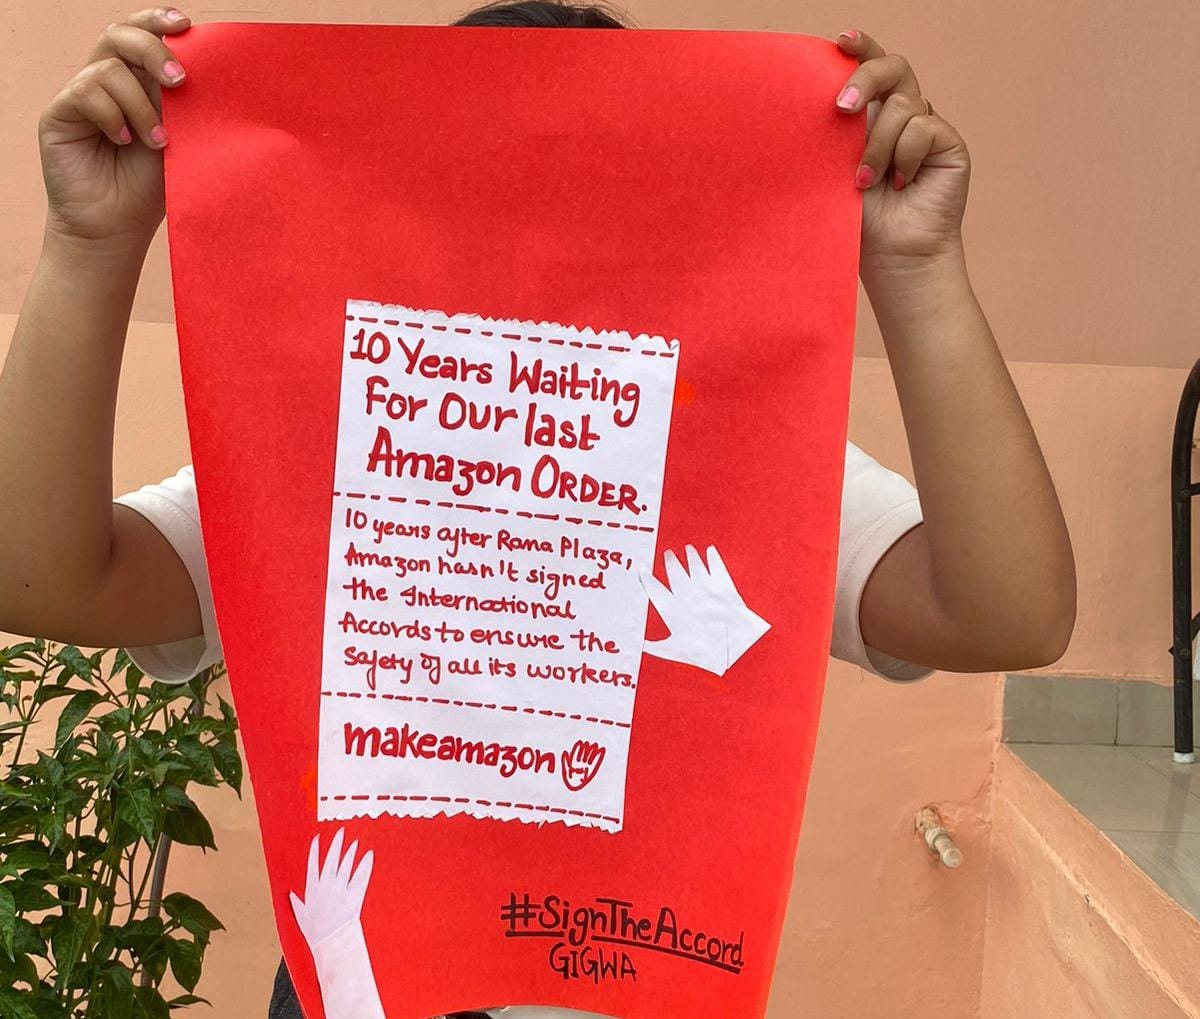 Stand with garment workers and sign the petition for Amazon to #SignTheAccord to prevent garment worker deaths.
 #MakeAmazonPay 
#RanaPlazaNeverAgain
#ranaplaza10neveragain 
@dharmendraind @uniglobalunion @nickrudikoff @WhatIsAHovig @OwenEspley @uniapro